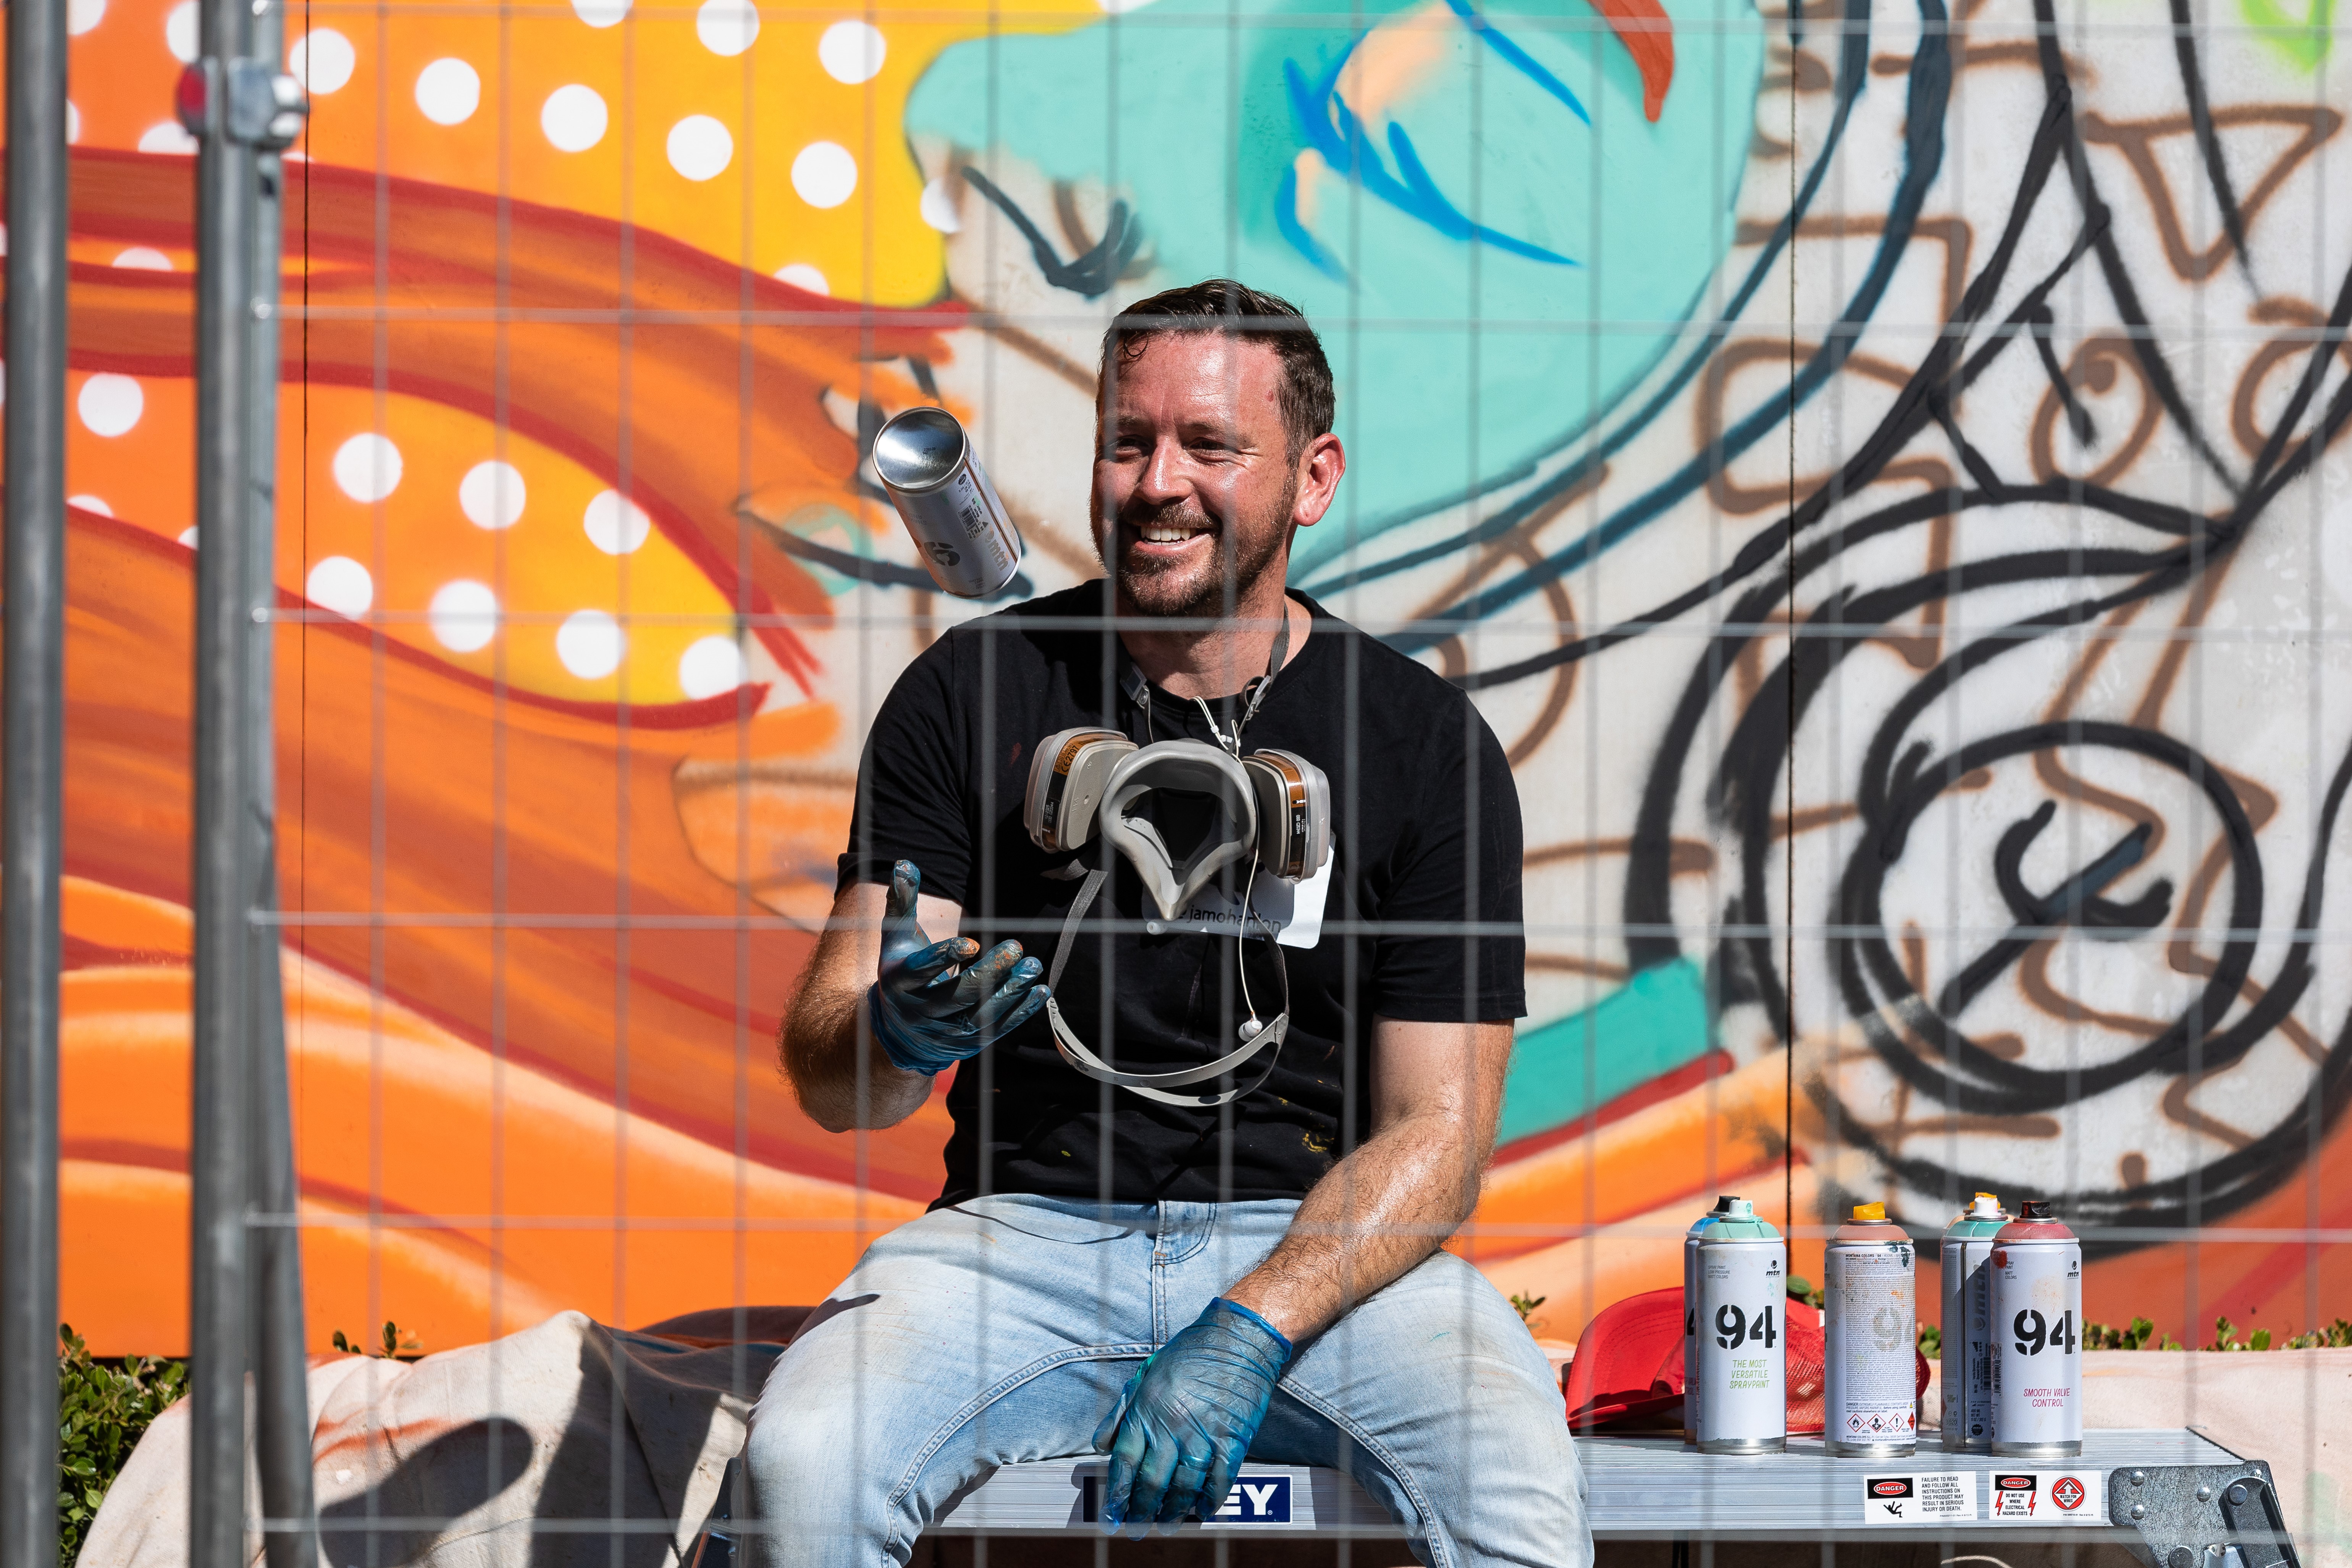 Street artist James O'Hanlon sitting in front of a partially finished mural, wearing goves and throwing a can of spray paint in the air